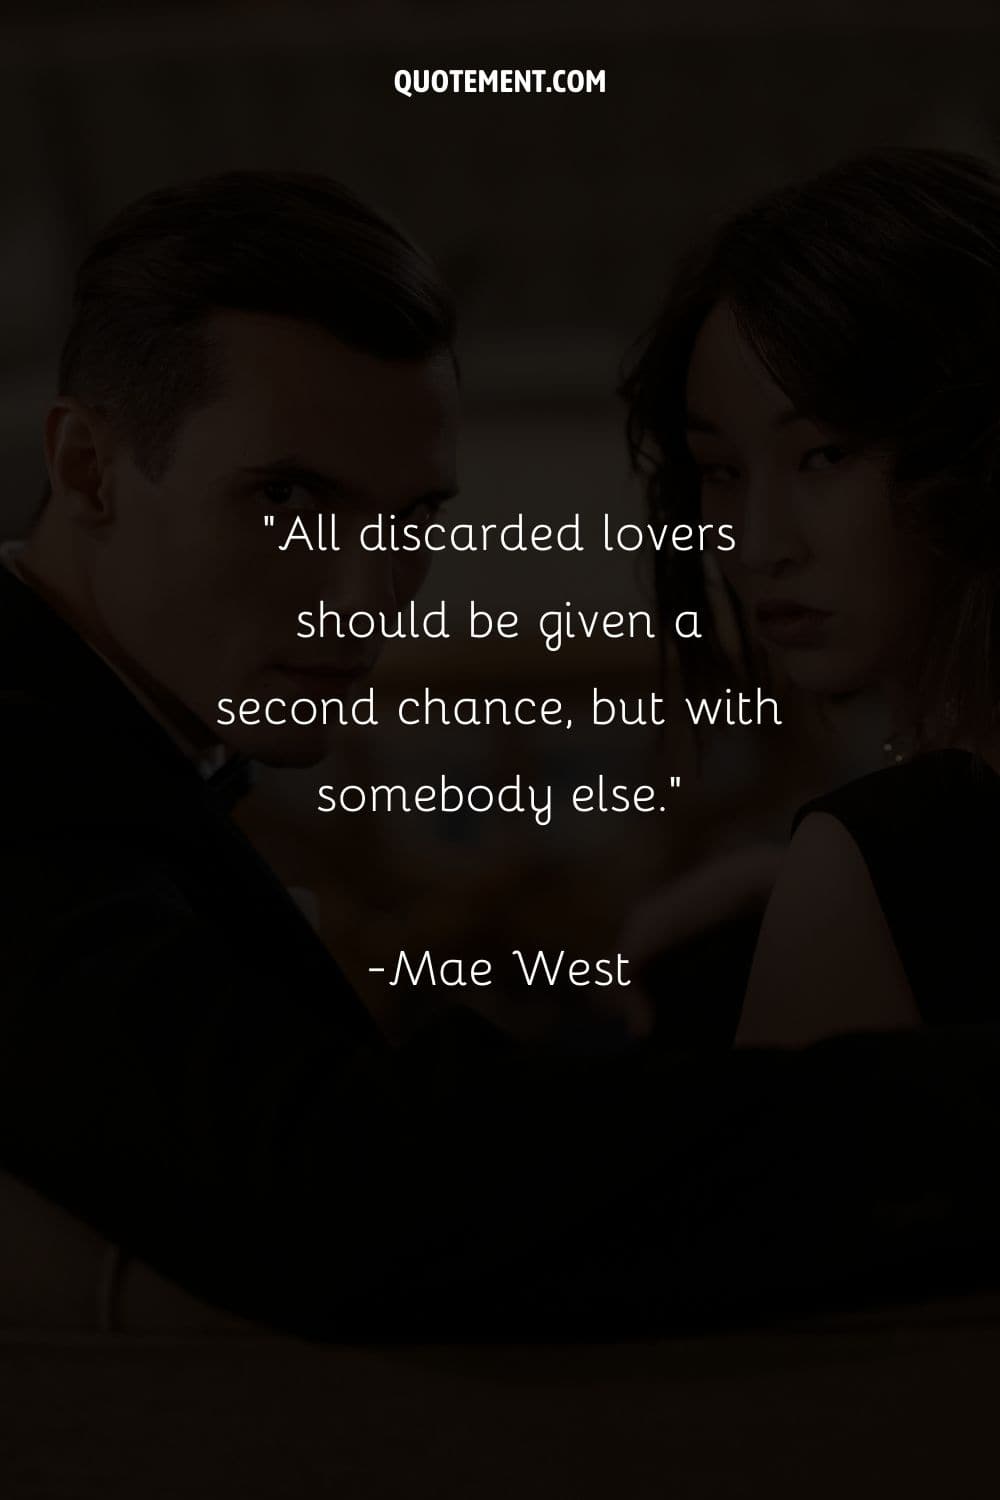 Image of a man and woman standing together representing a quote on second chances.